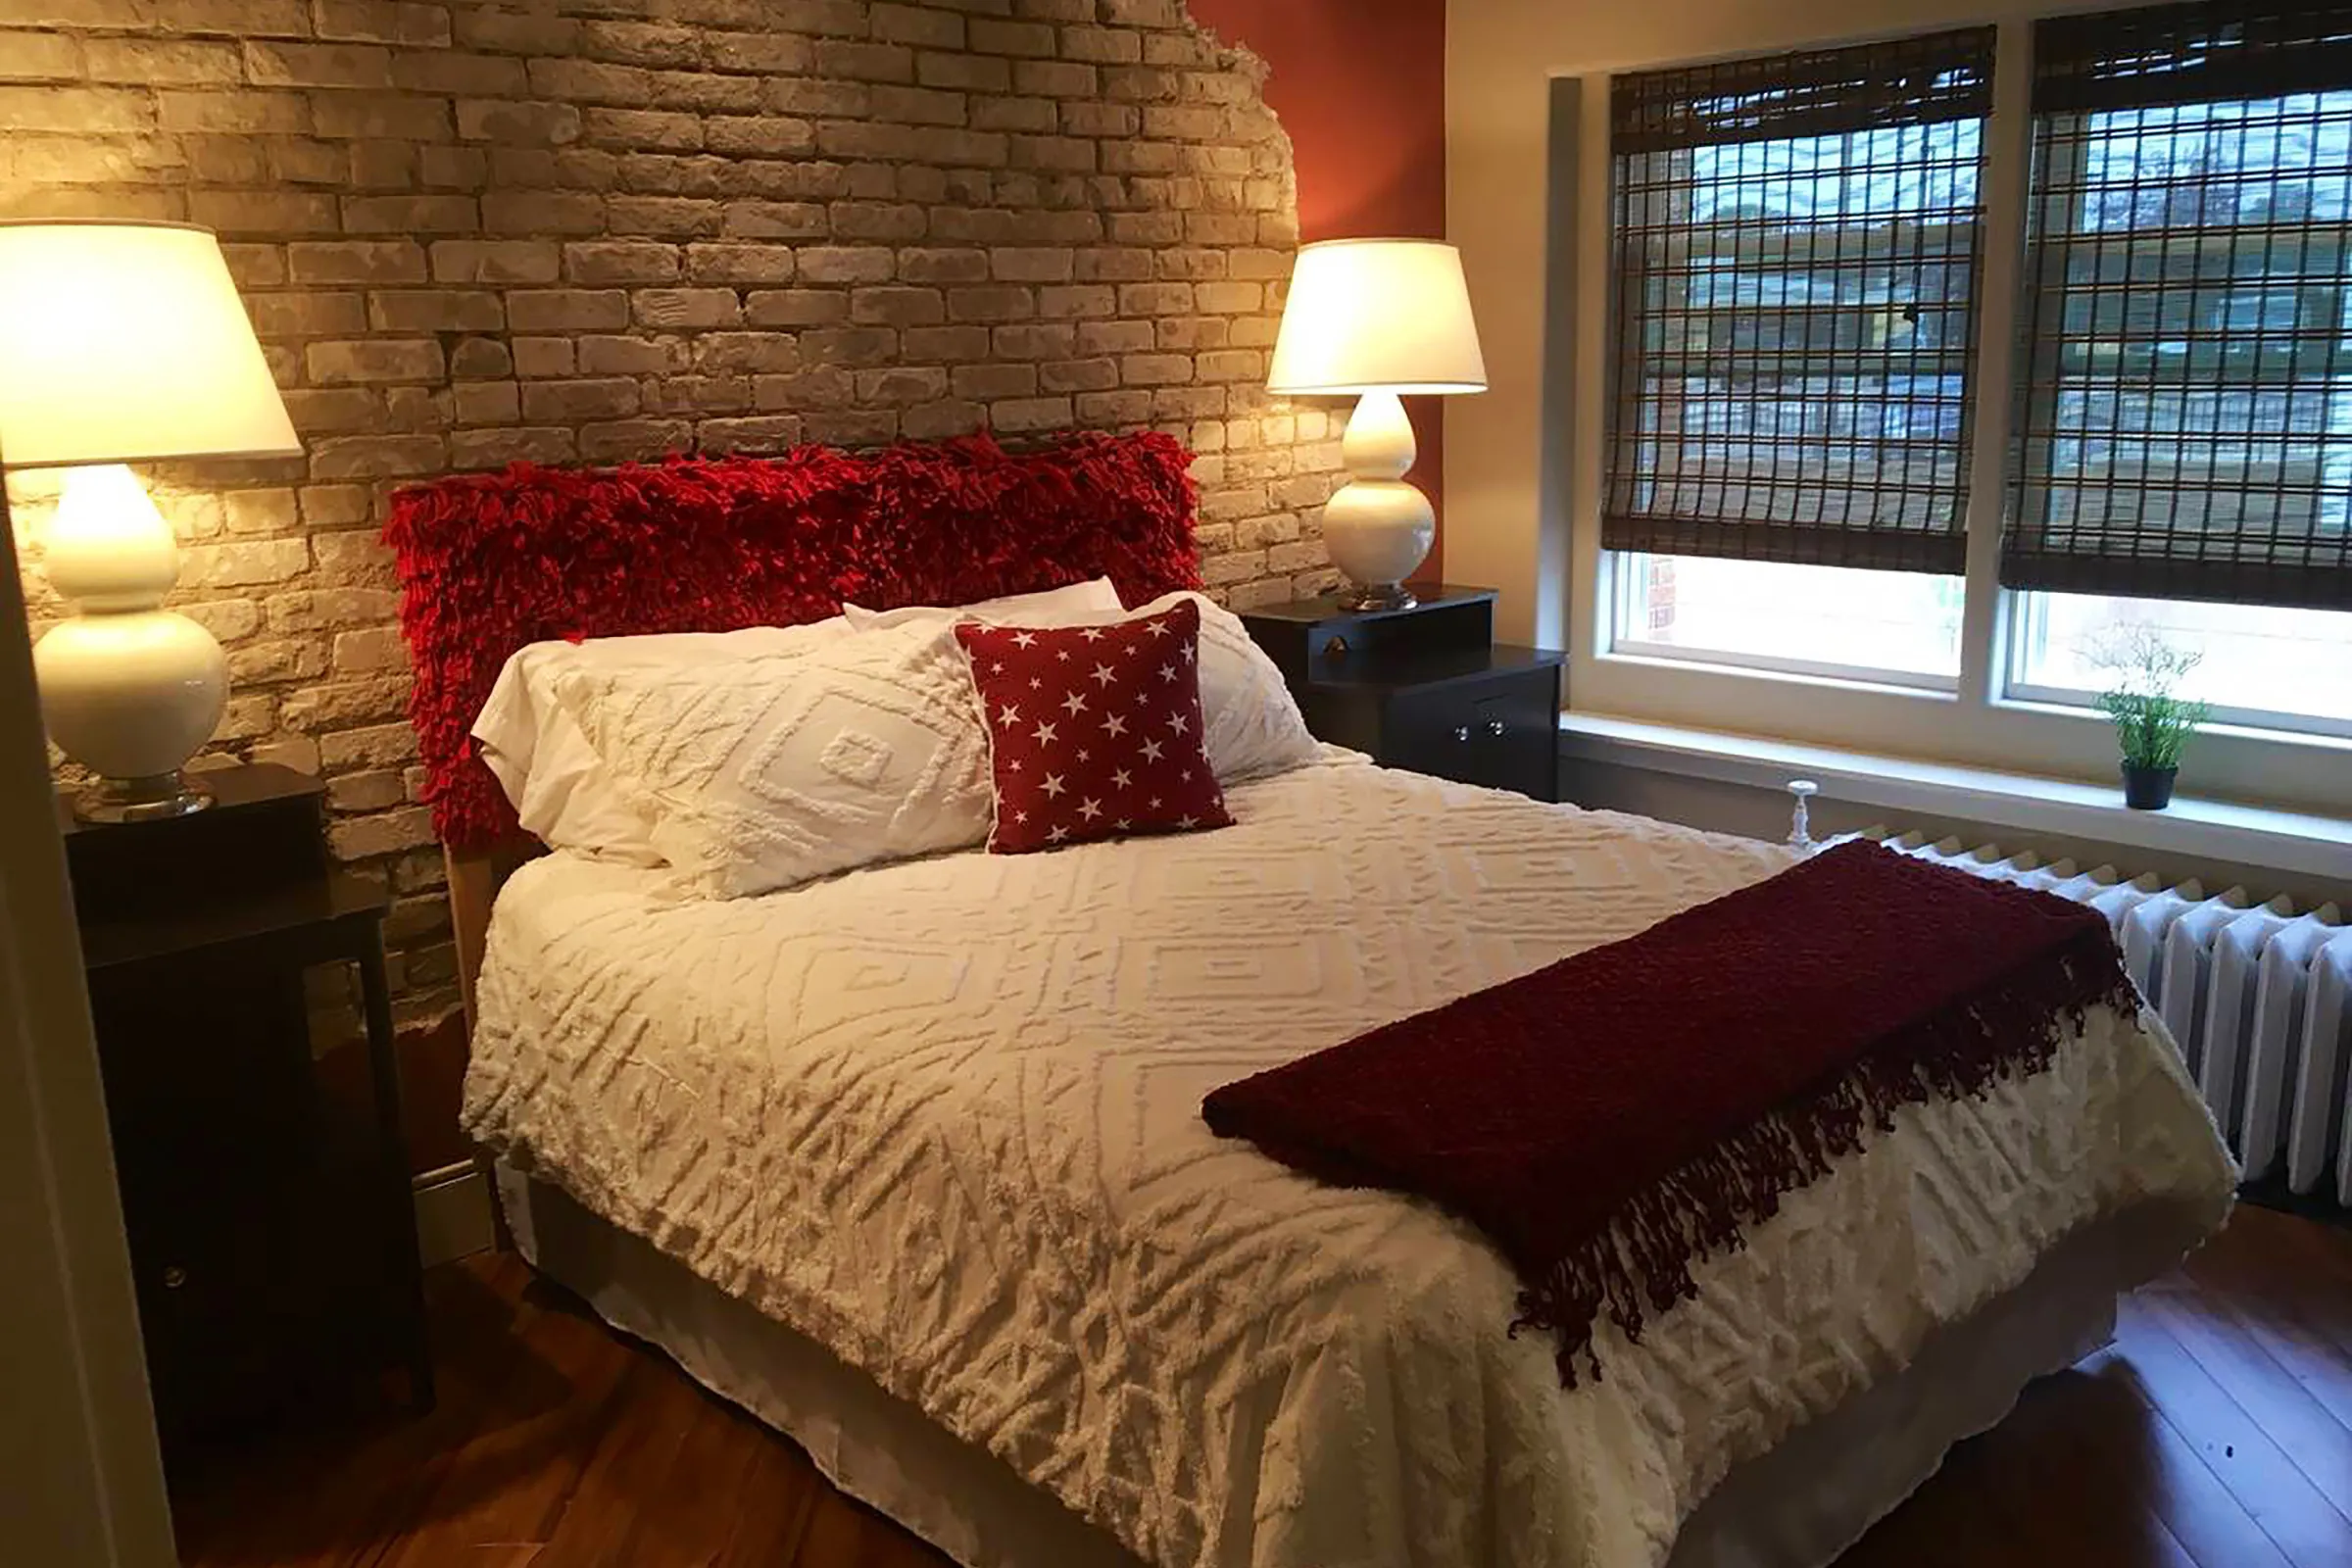 A bed with a white comforter and red throw blanket, with two end tables with light lamps. 